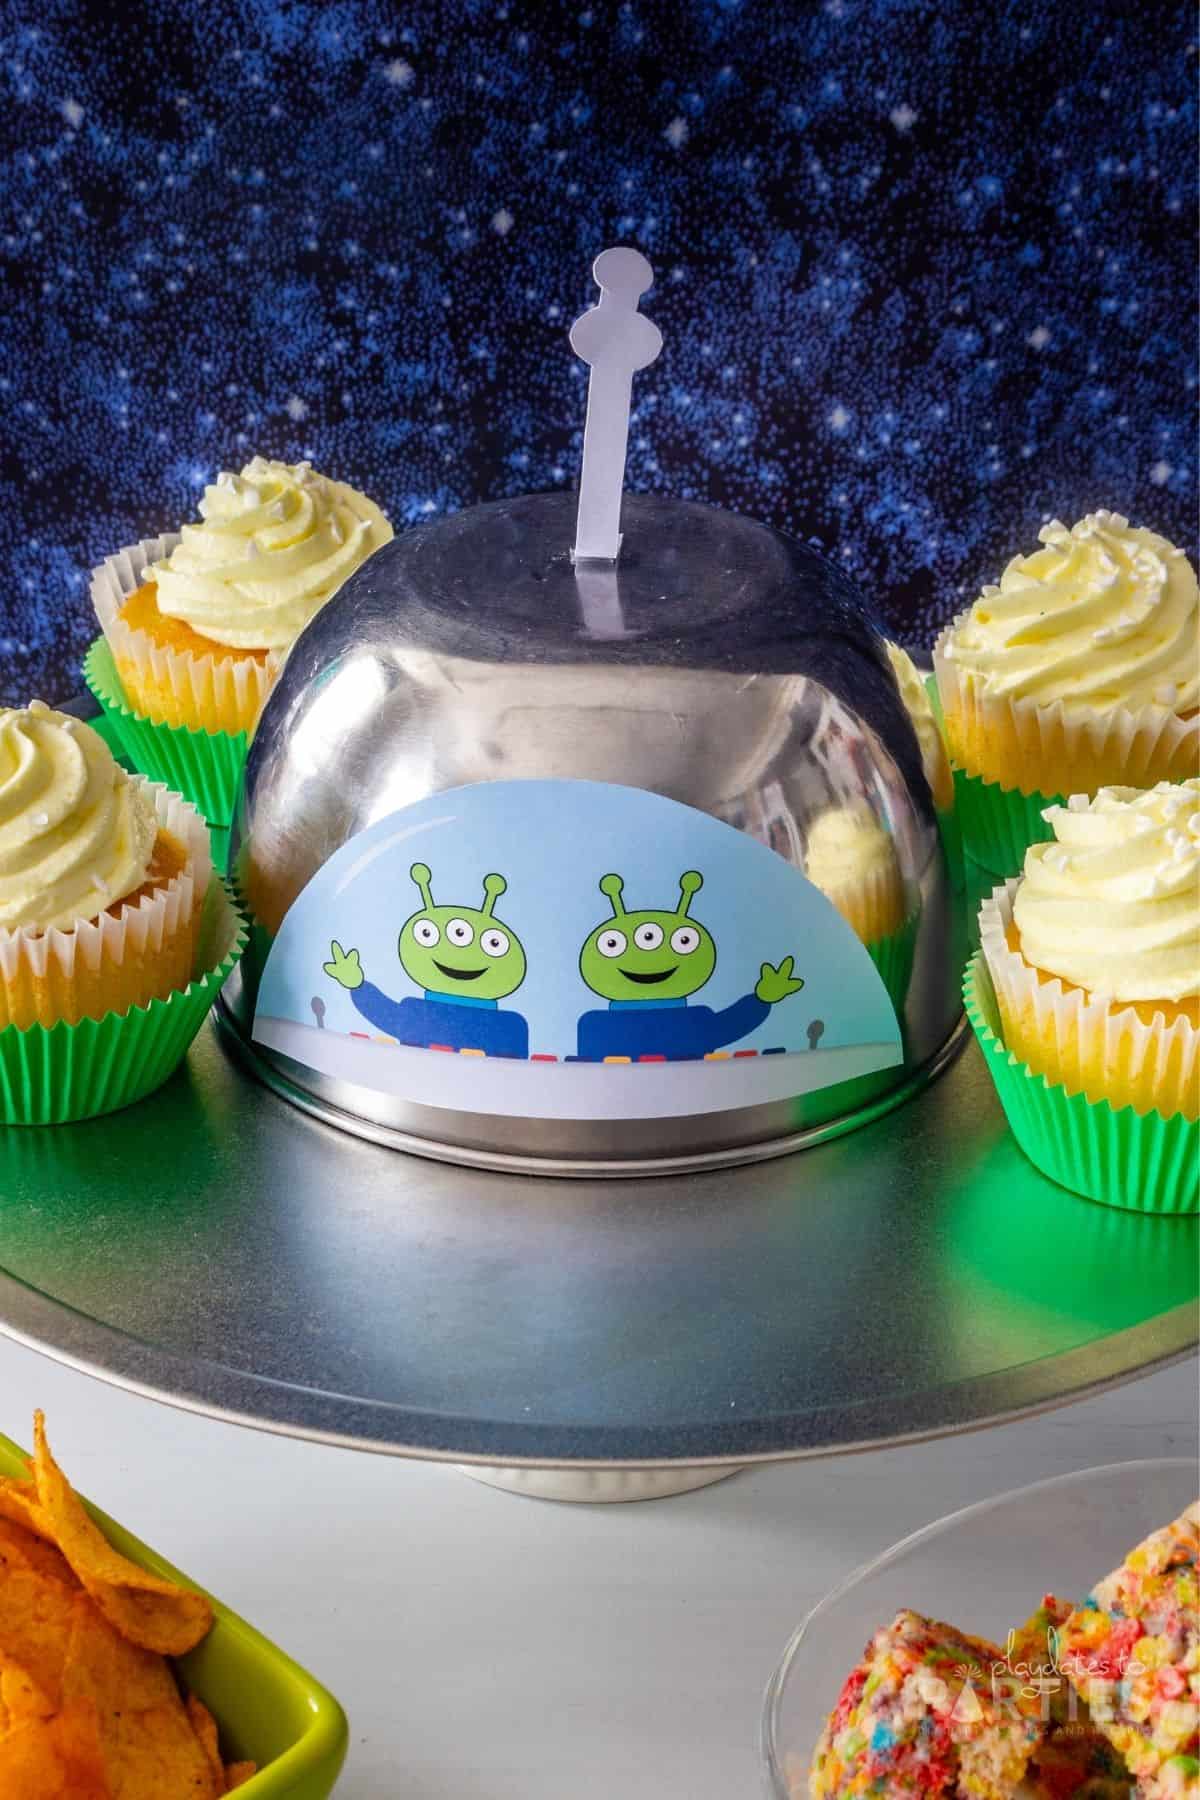 Slightly overhead view of space themed party tray surrounded by cupcakes with green liners.